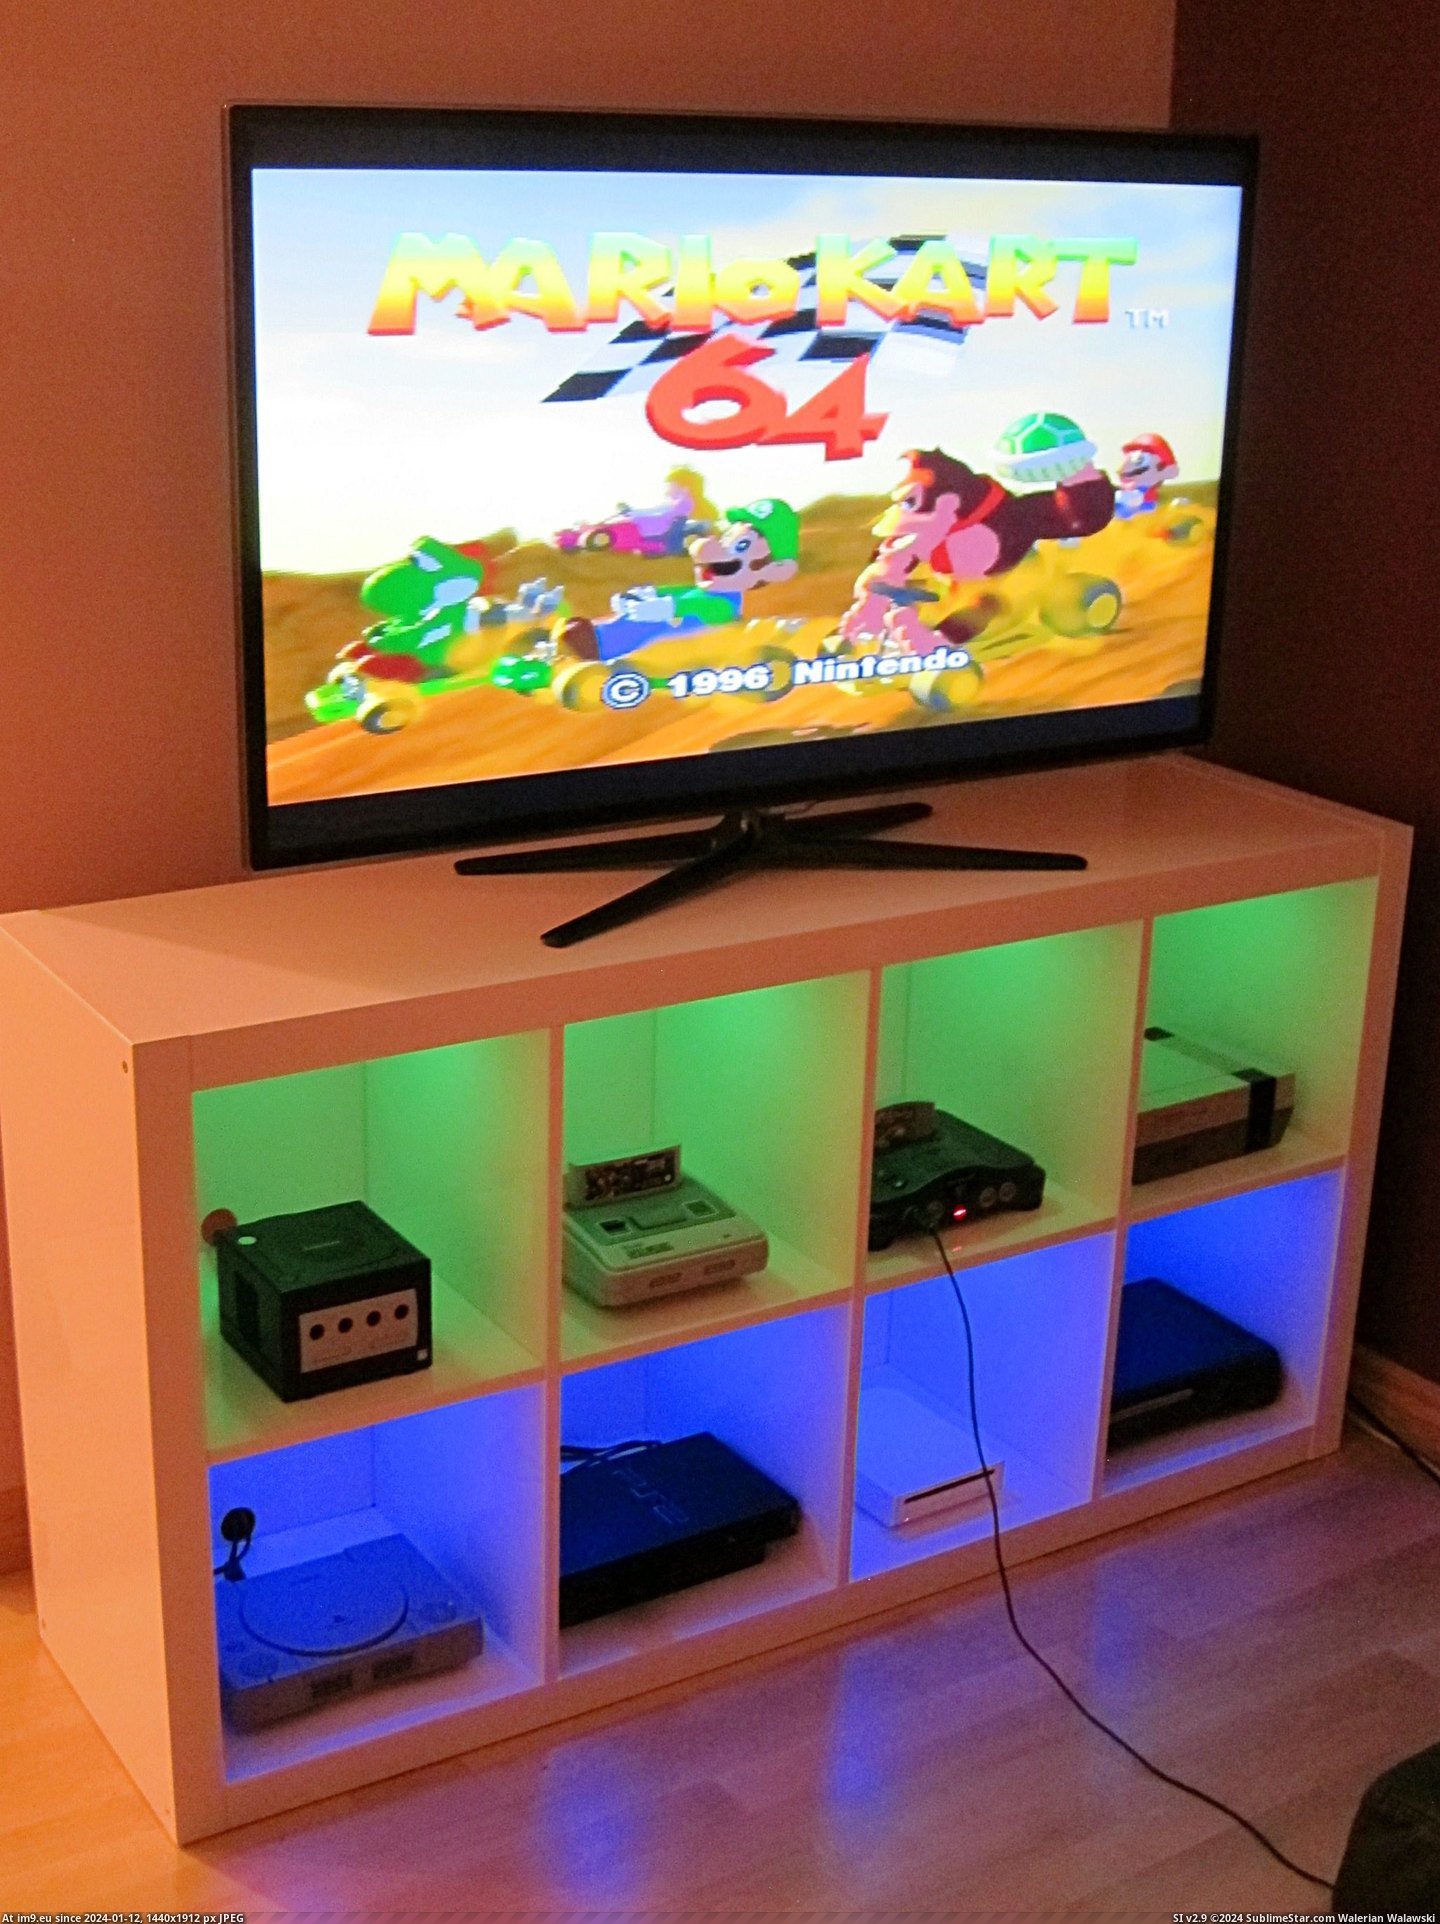 #Gaming #Happy #Finished #Product #Ikea #Bookshelf #Cabinet #Console #Modified [Gaming] I modified an Ikea bookshelf to make a console cabinet. Very happy with the finished product! Pic. (Изображение из альбом My r/GAMING favs))